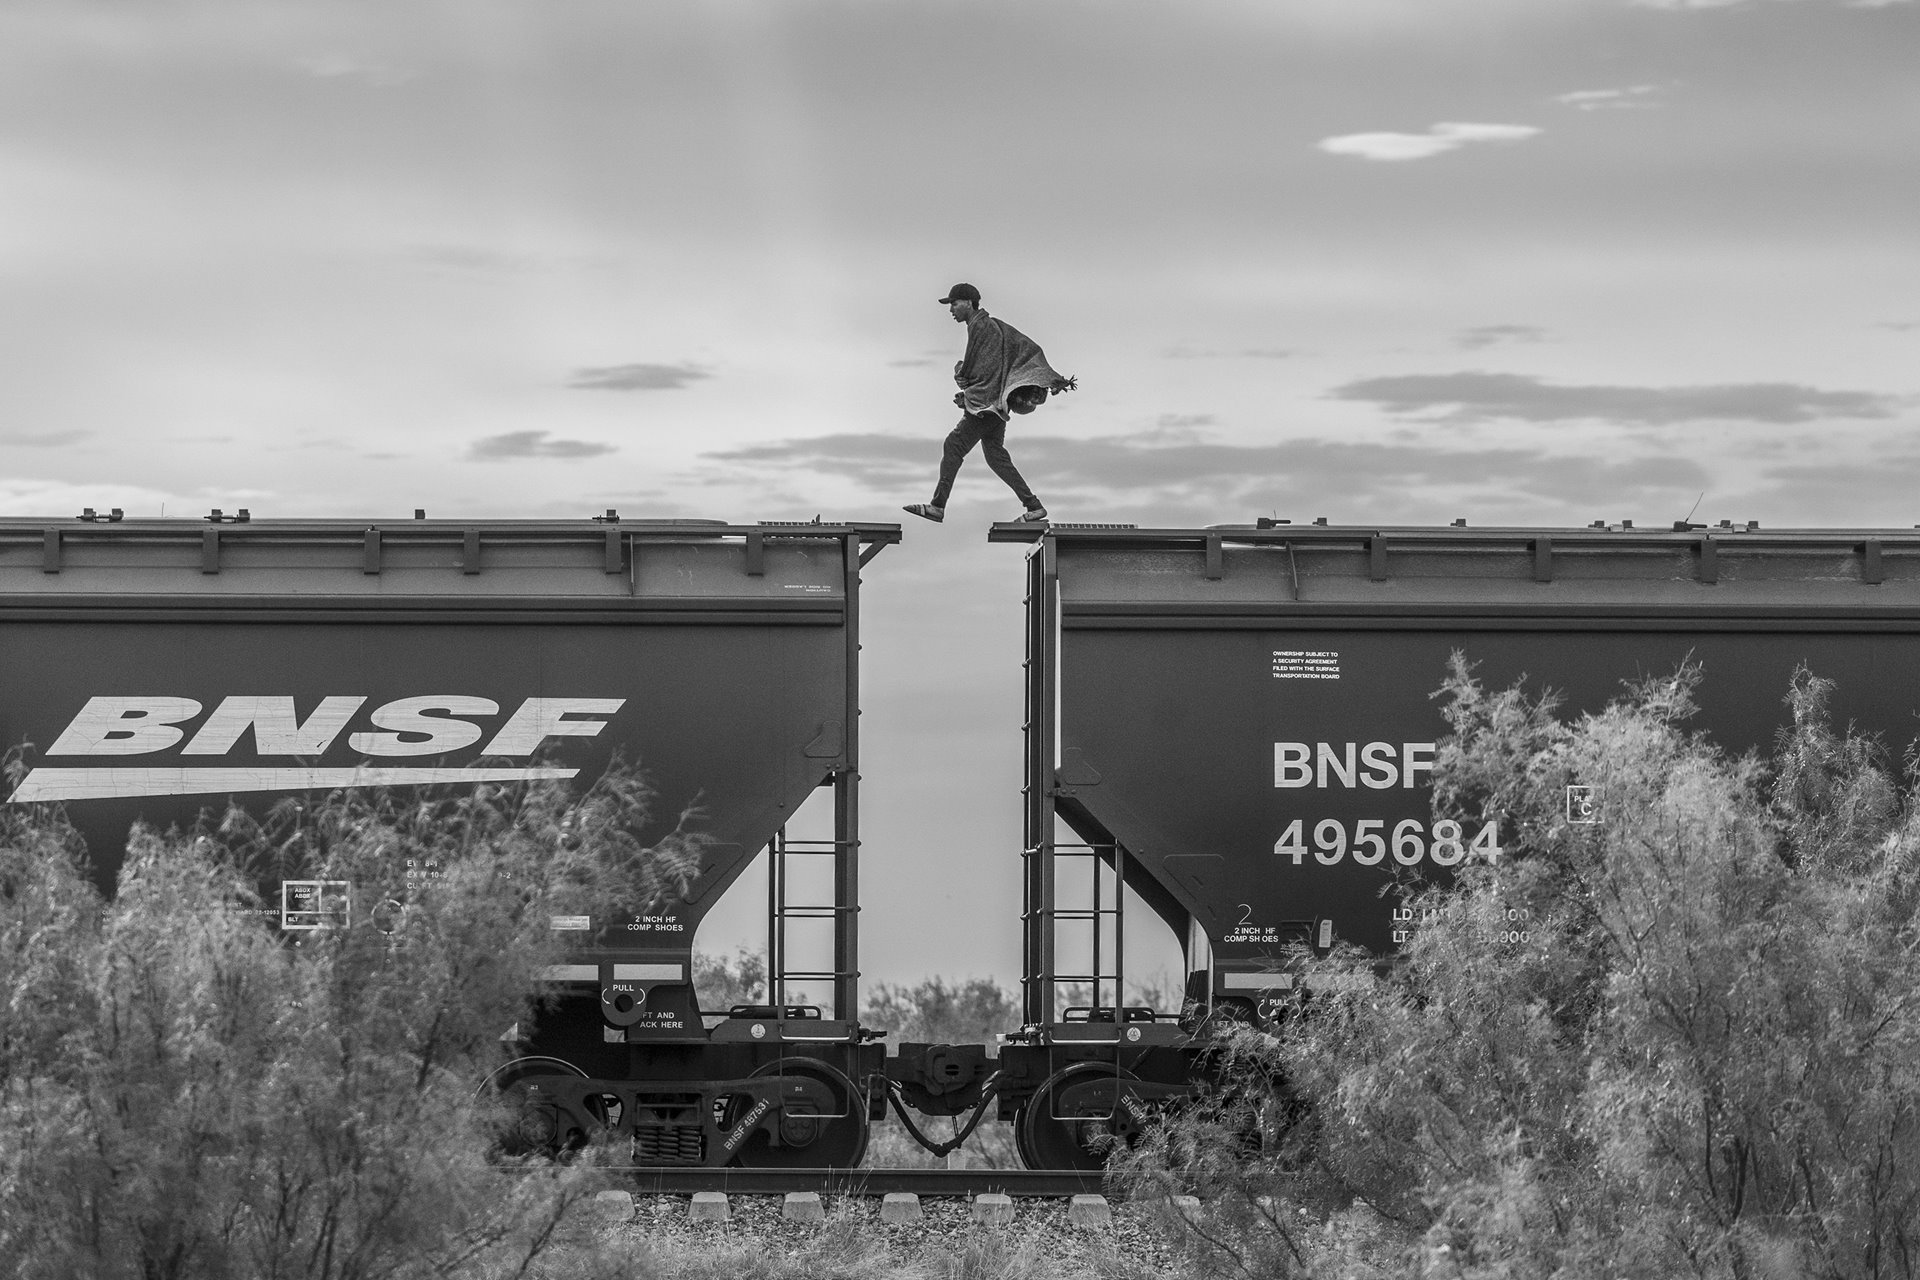 A migrant walks atop a freight train known as &ldquo;The Beast&rdquo; in Piedras Negras, Mexico. Migrants and asylum seekers lacking the financial resources to pay a smuggler often resort to using cargo trains to reach the United States border. This mode of transportation is very dangerous; over the years, hundreds have fallen onto the tracks and have been killed or mutilated. Thousands more have fallen victim to extortion, rape, kidnapping, or robbery orchestrated by drug cartels or corrupt authorities in various stops along the train&rsquo;s northward route.